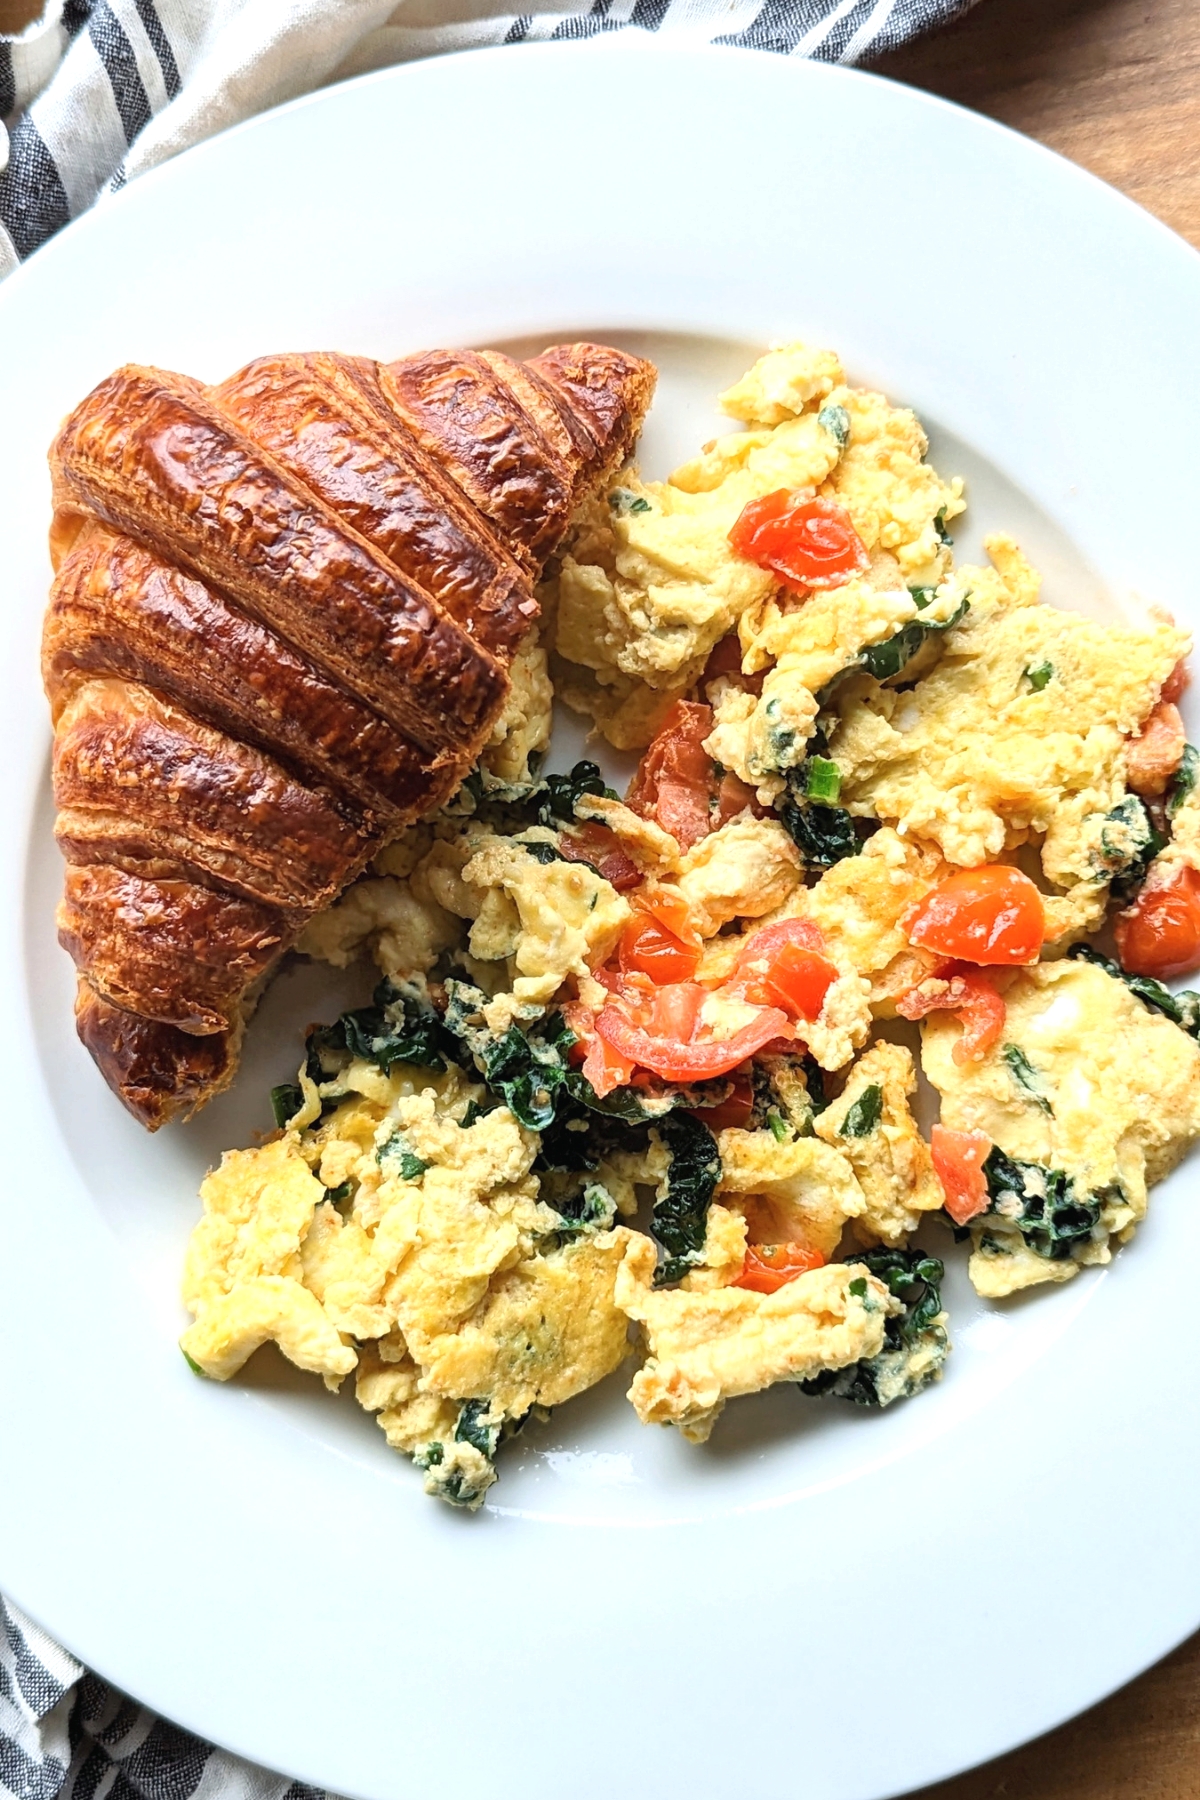 kale scrambled eggs recipe with croissants  trendy kale recipes easy kale recipes for breakfast